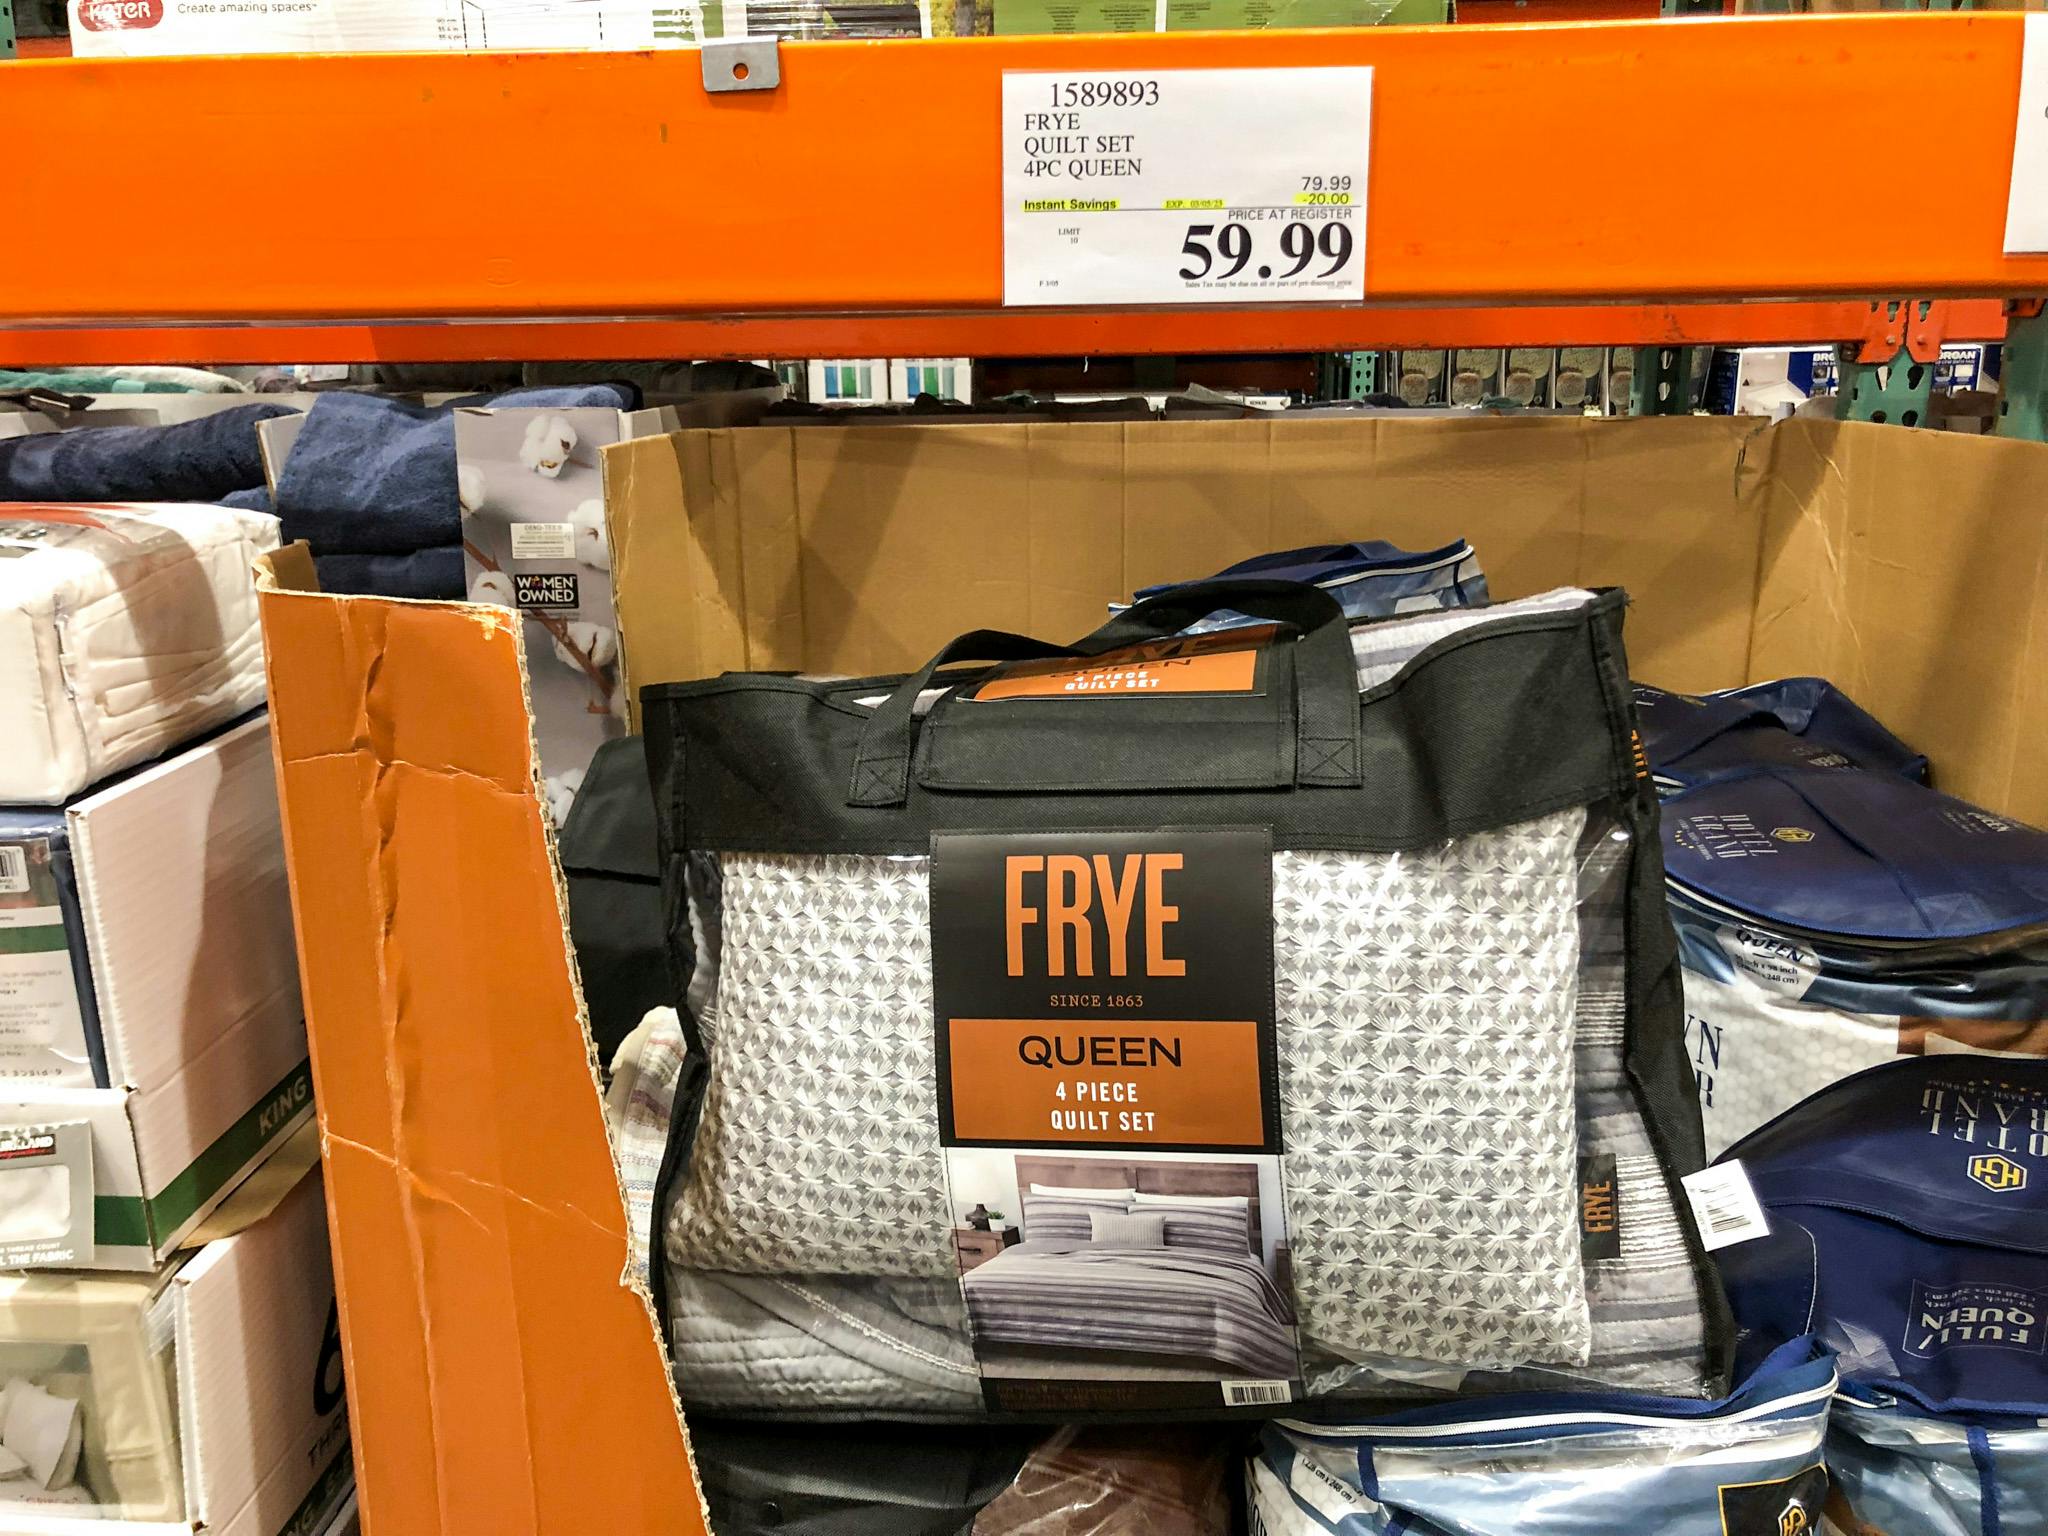 Frye 4-Piece Quilt Sets, as Low as $ at Costco - The Krazy Coupon Lady